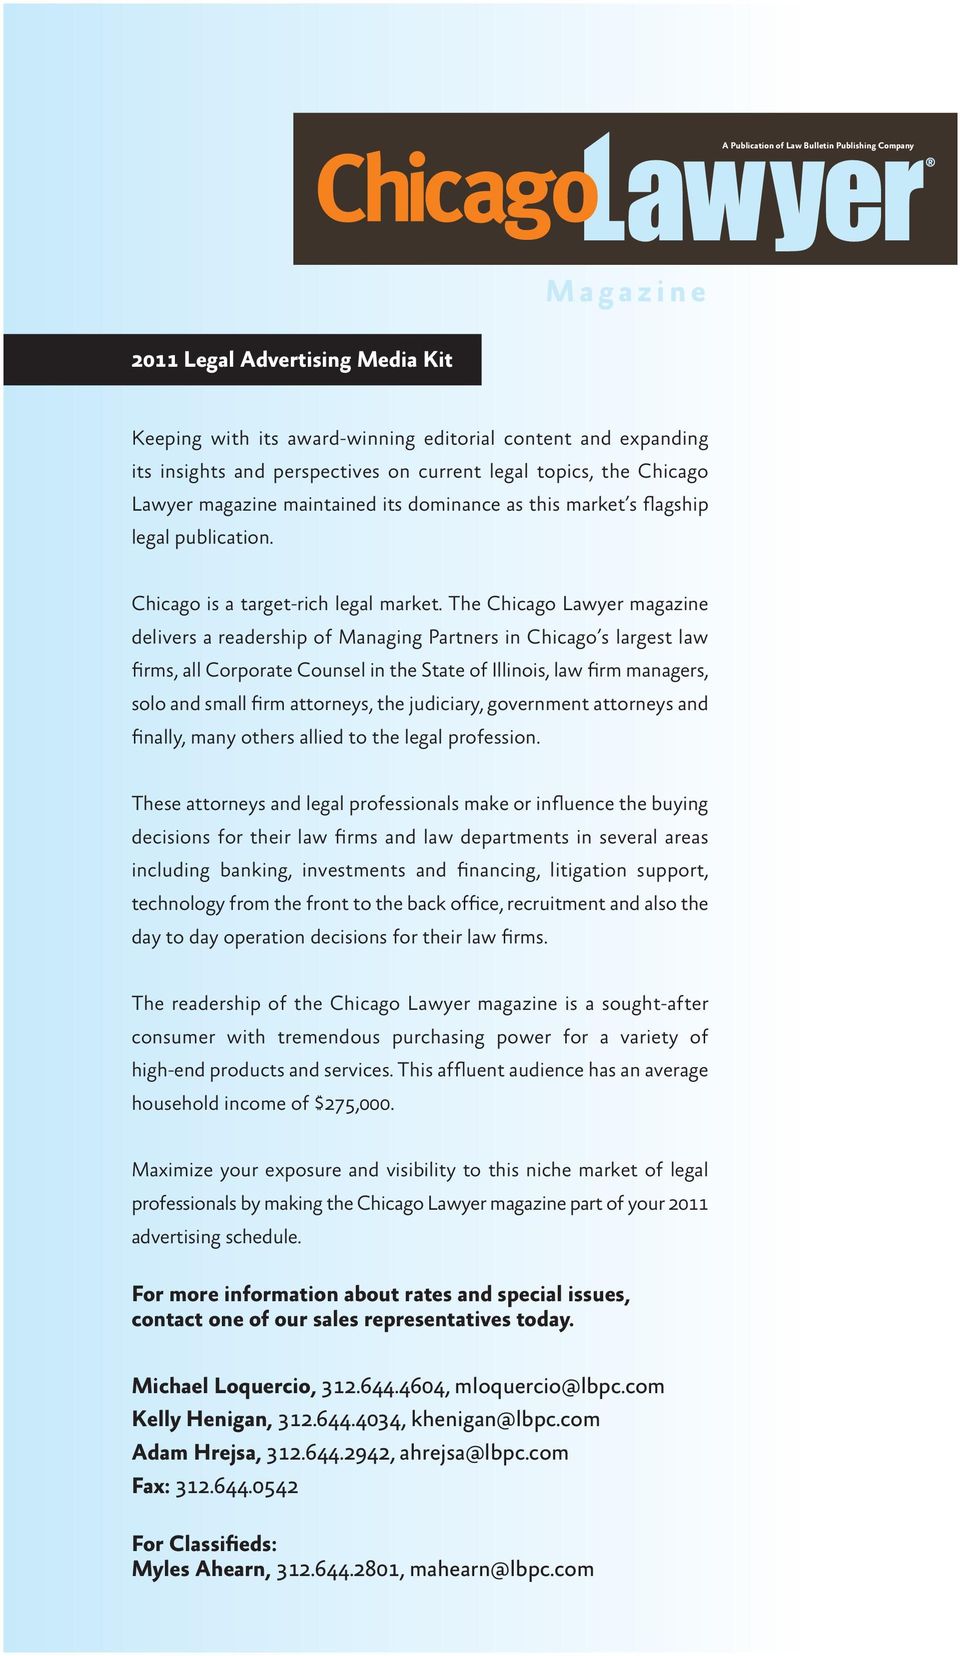 The Chicago Lawyer magazine delivers a readership of Managing Partners in Chicago s largest law firms, all Corporate Counsel in the State of Illinois, law firm managers, solo and small firm